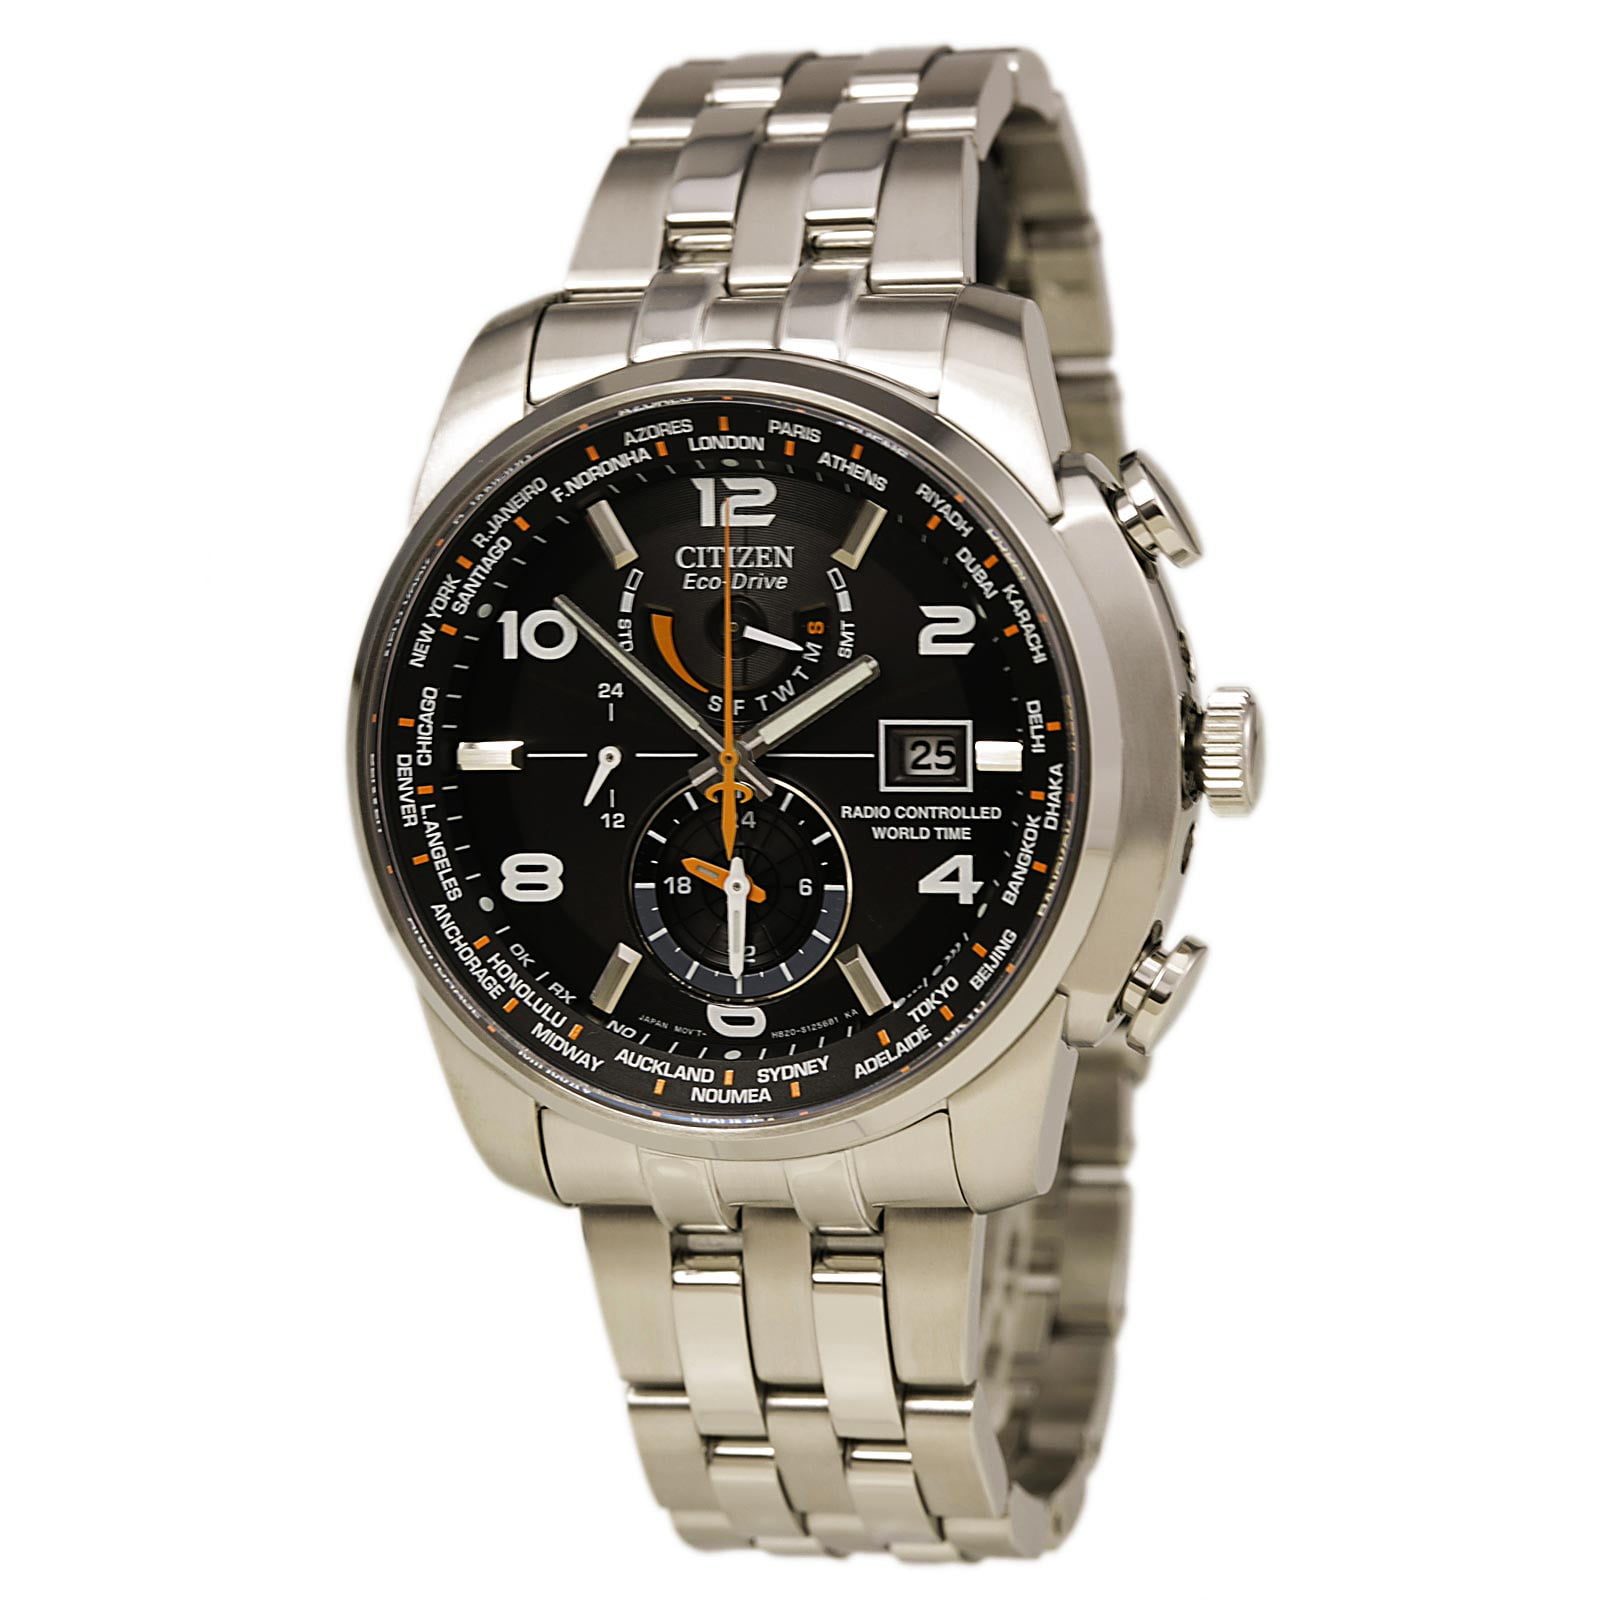 Citizen Men's Eco-Drive World Time AT Radio Watch, AT9010-52E